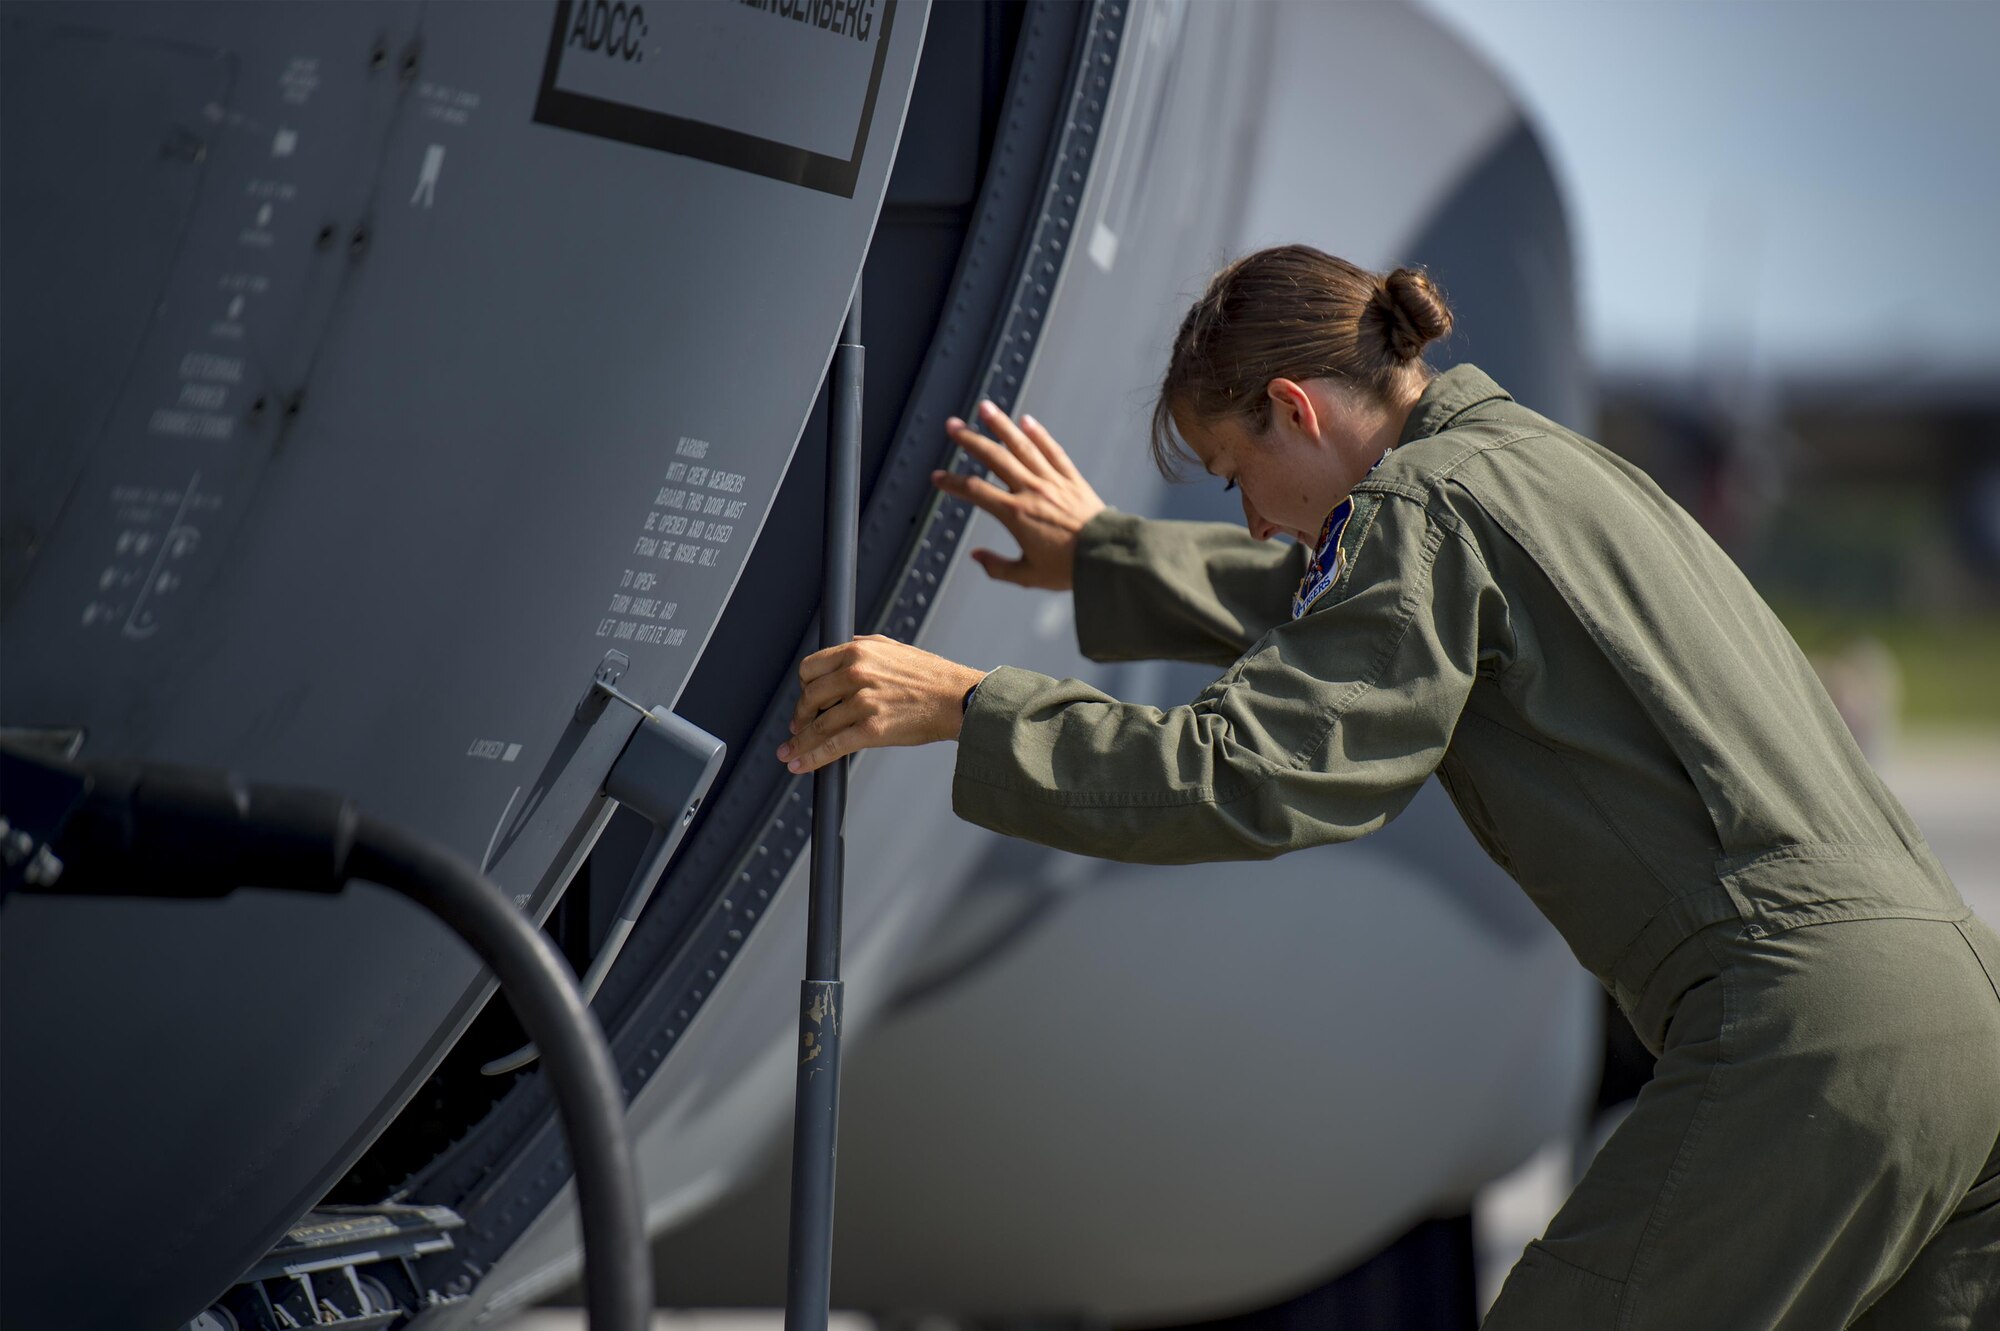 U.S. Air Force Capt. Christy Wise, 71st Rescue Squadron pilot, climbs into an HC-130J Combat King II for her first flight since becoming an above-the-knee amputee, July 22, 2016, at Moody Air Force Base, Ga. Wise underwent nearly 15 months of rehabilitation before she was cleared to fly. (U.S. Air Force Photo by Senior Airman Ryan Callaghan)
